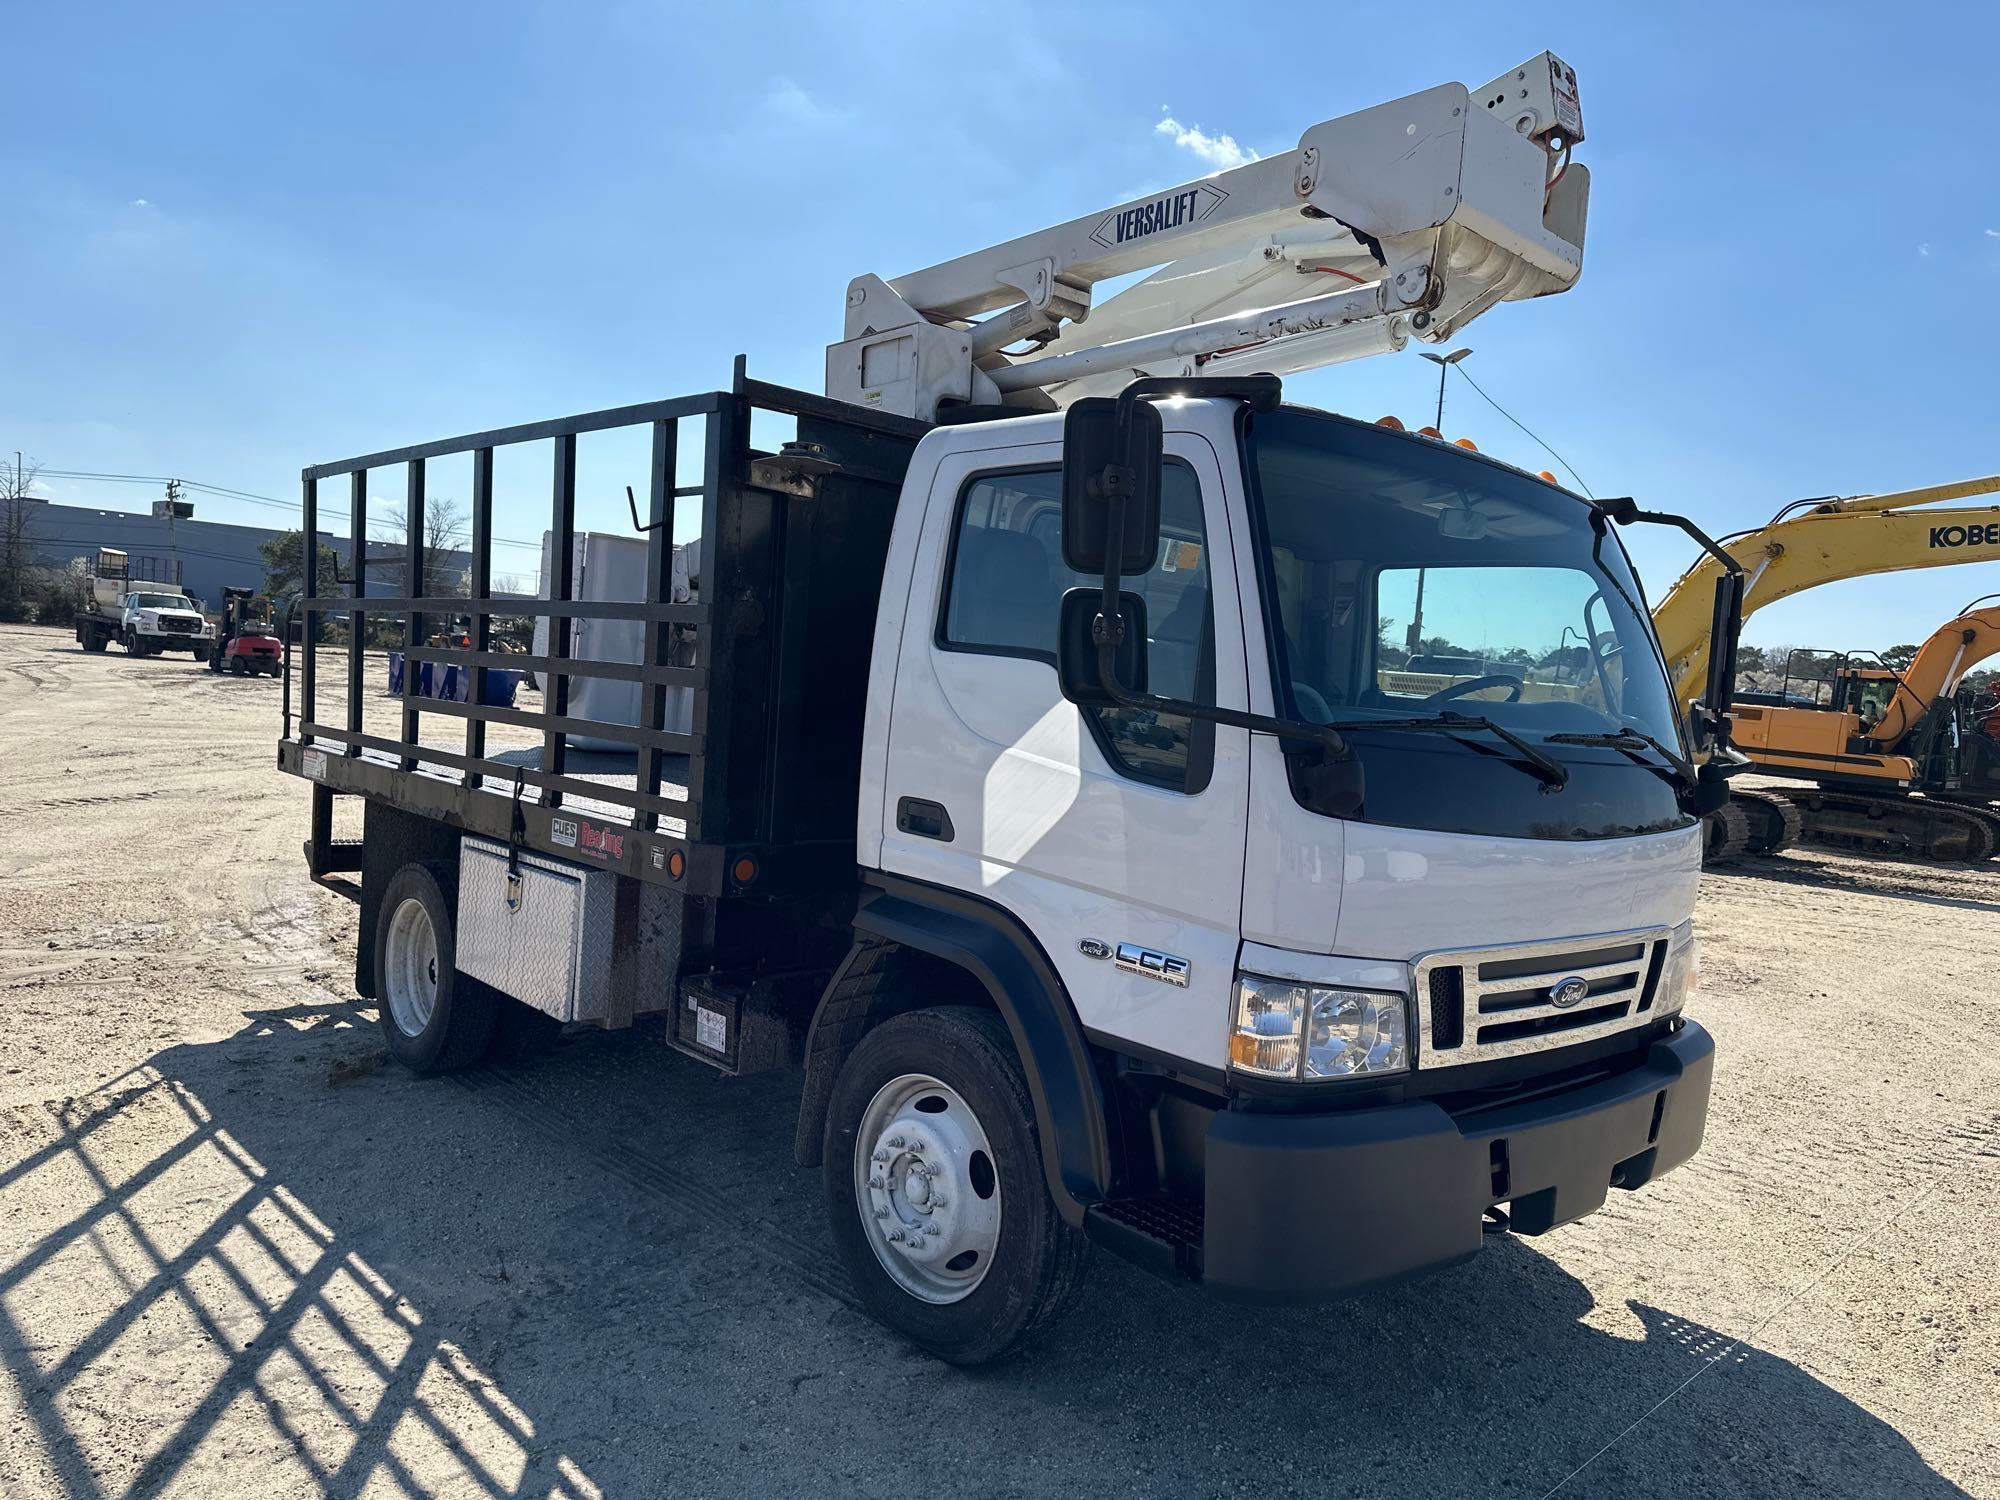 2006 FORD LCF BUCKET TRUCK VN:3FRML55Z16V413142 powered by 4.5L 6 cylinder diesel engine, equipped